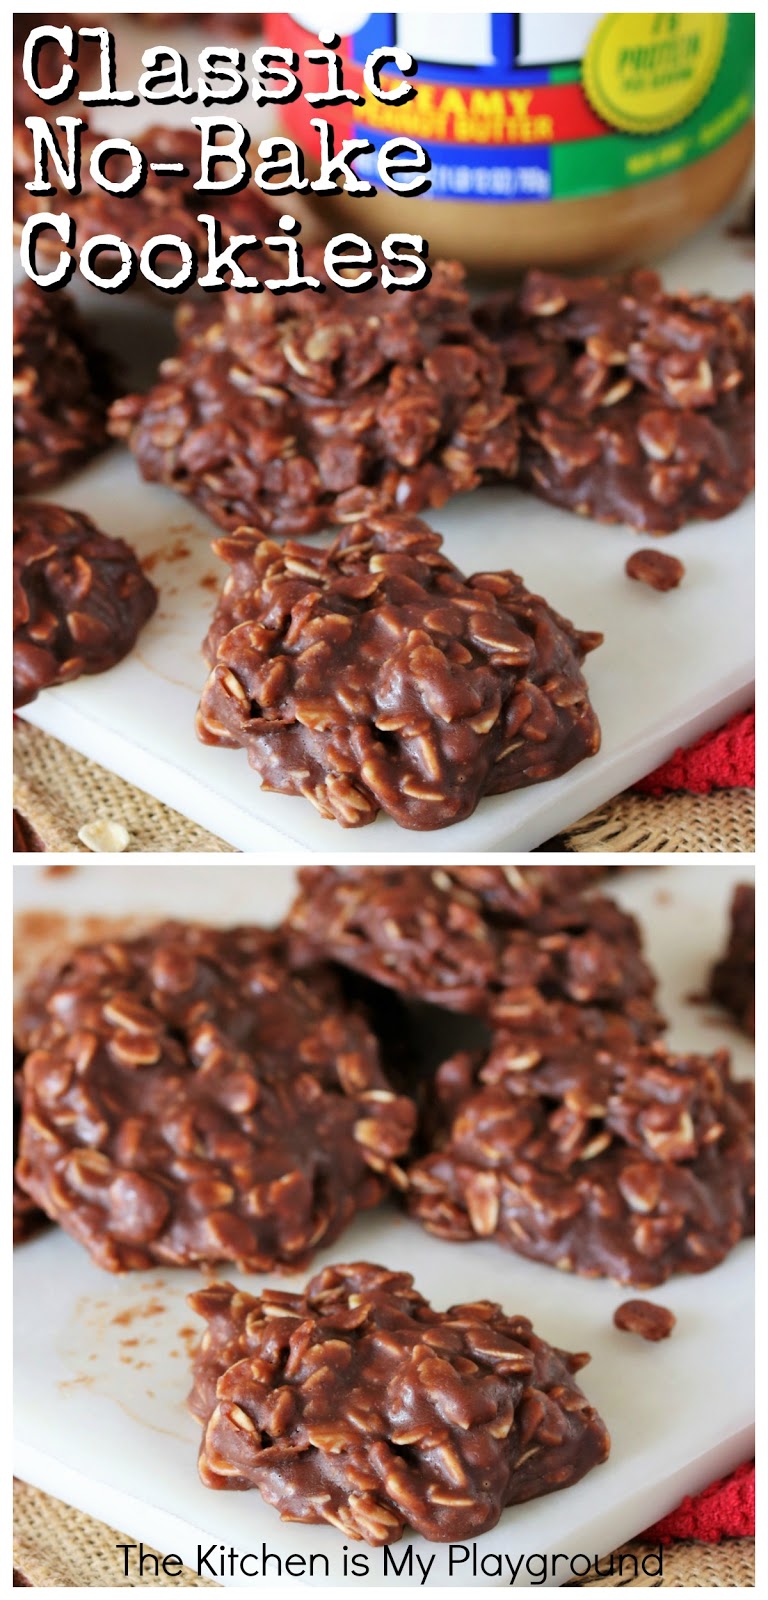 Classic No-Bake Cookies | The Kitchen is My Playground